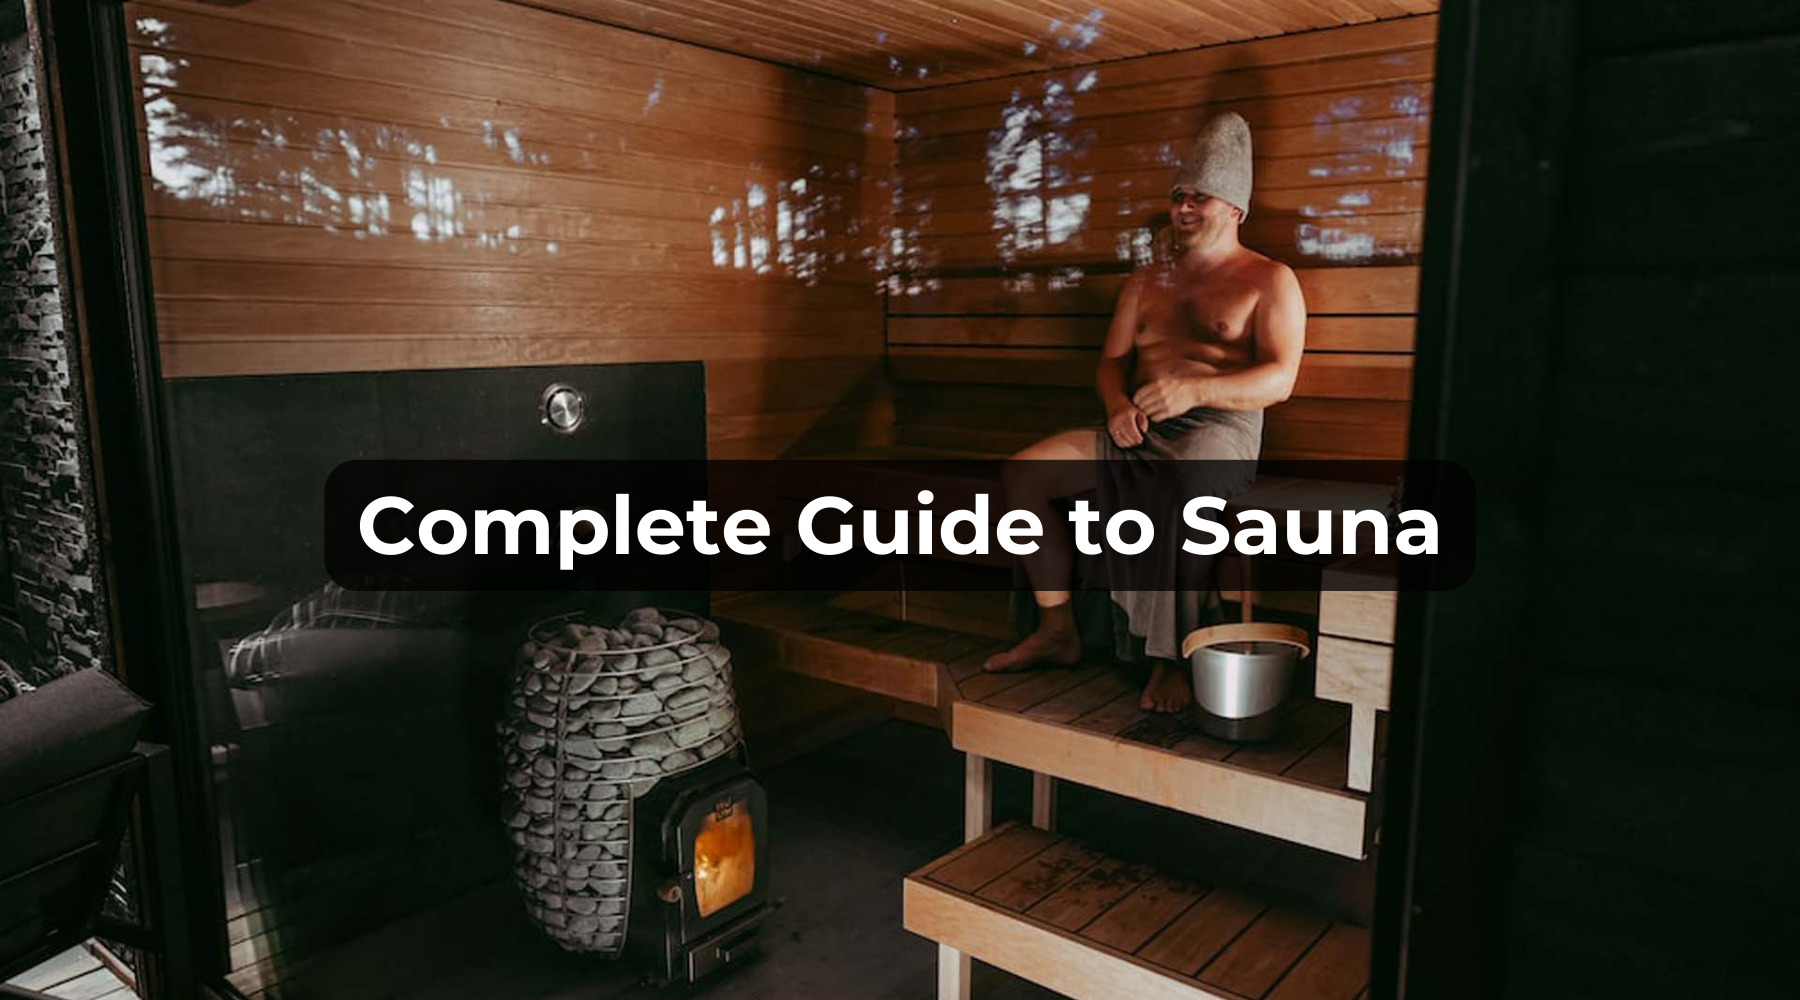 How to Sauna: A Complete Guide to Using and Enjoying Your Sauna